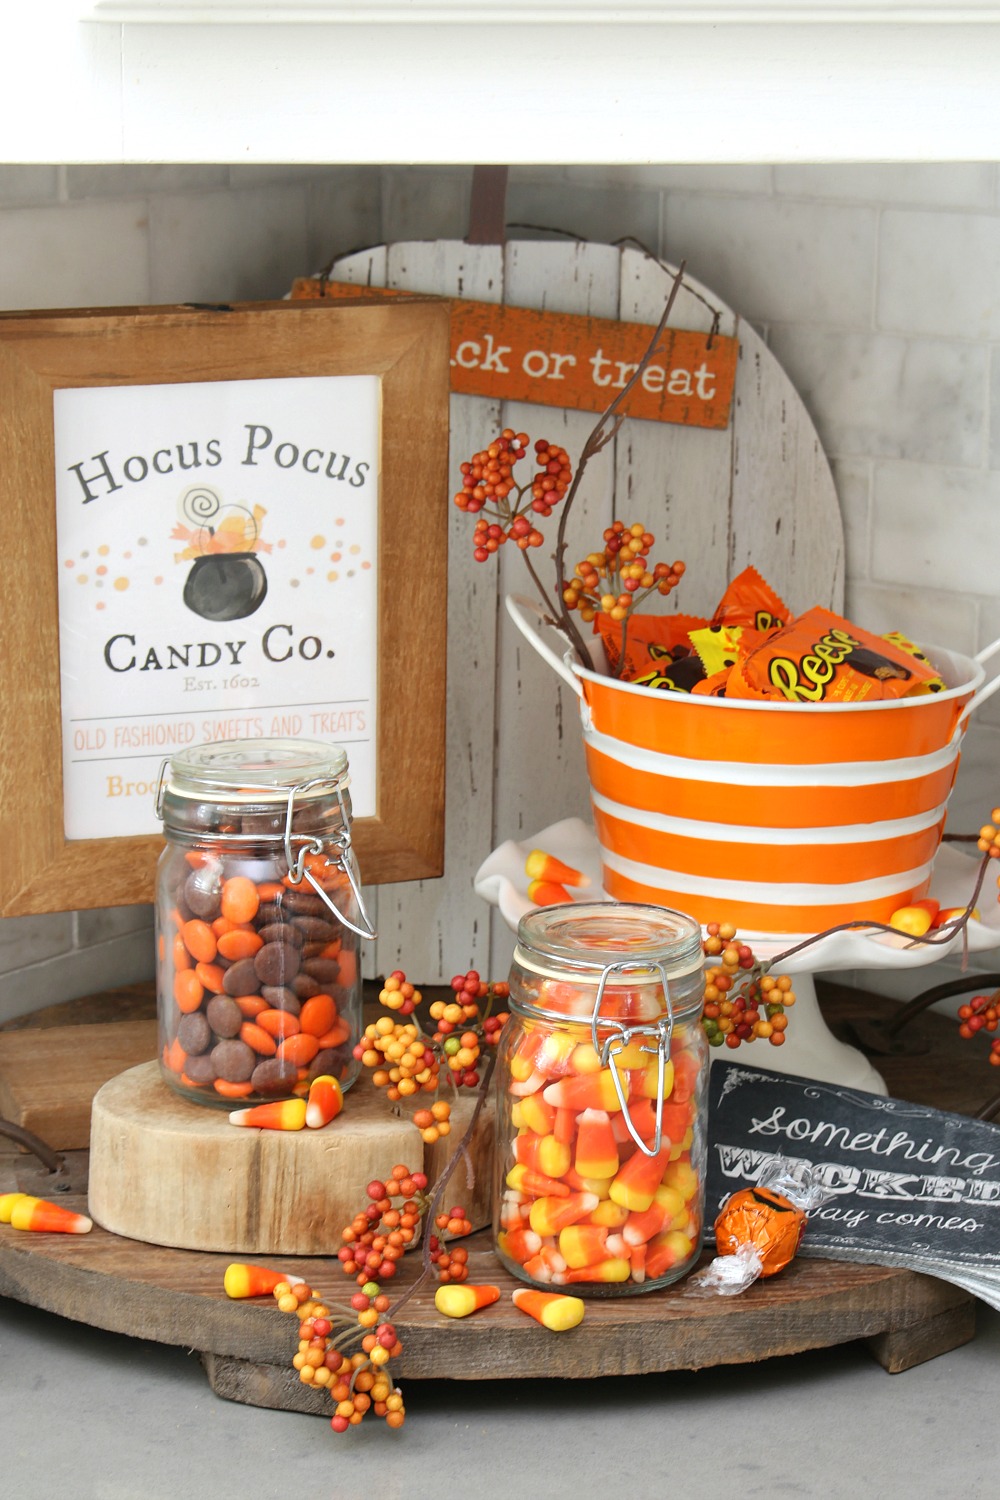 Hocus Pocus Candy Co. free Halloween printable used for a fun Halloween candy bar.